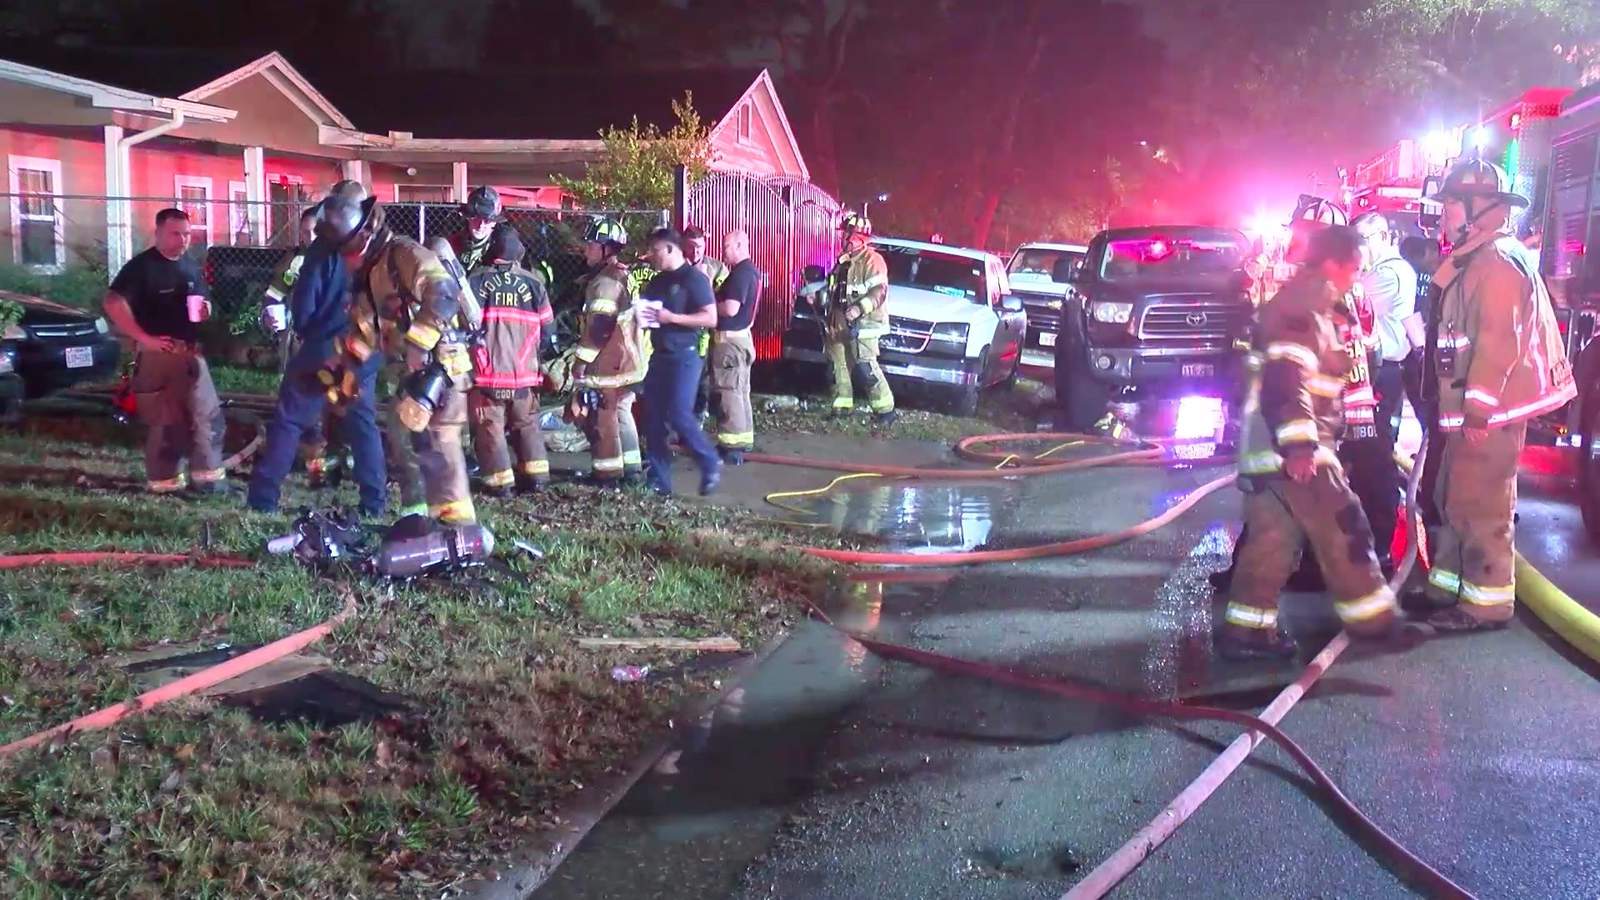 ‘The whole house is a total loss’: Houston family displaced after cooking mishap causes fire, officials say